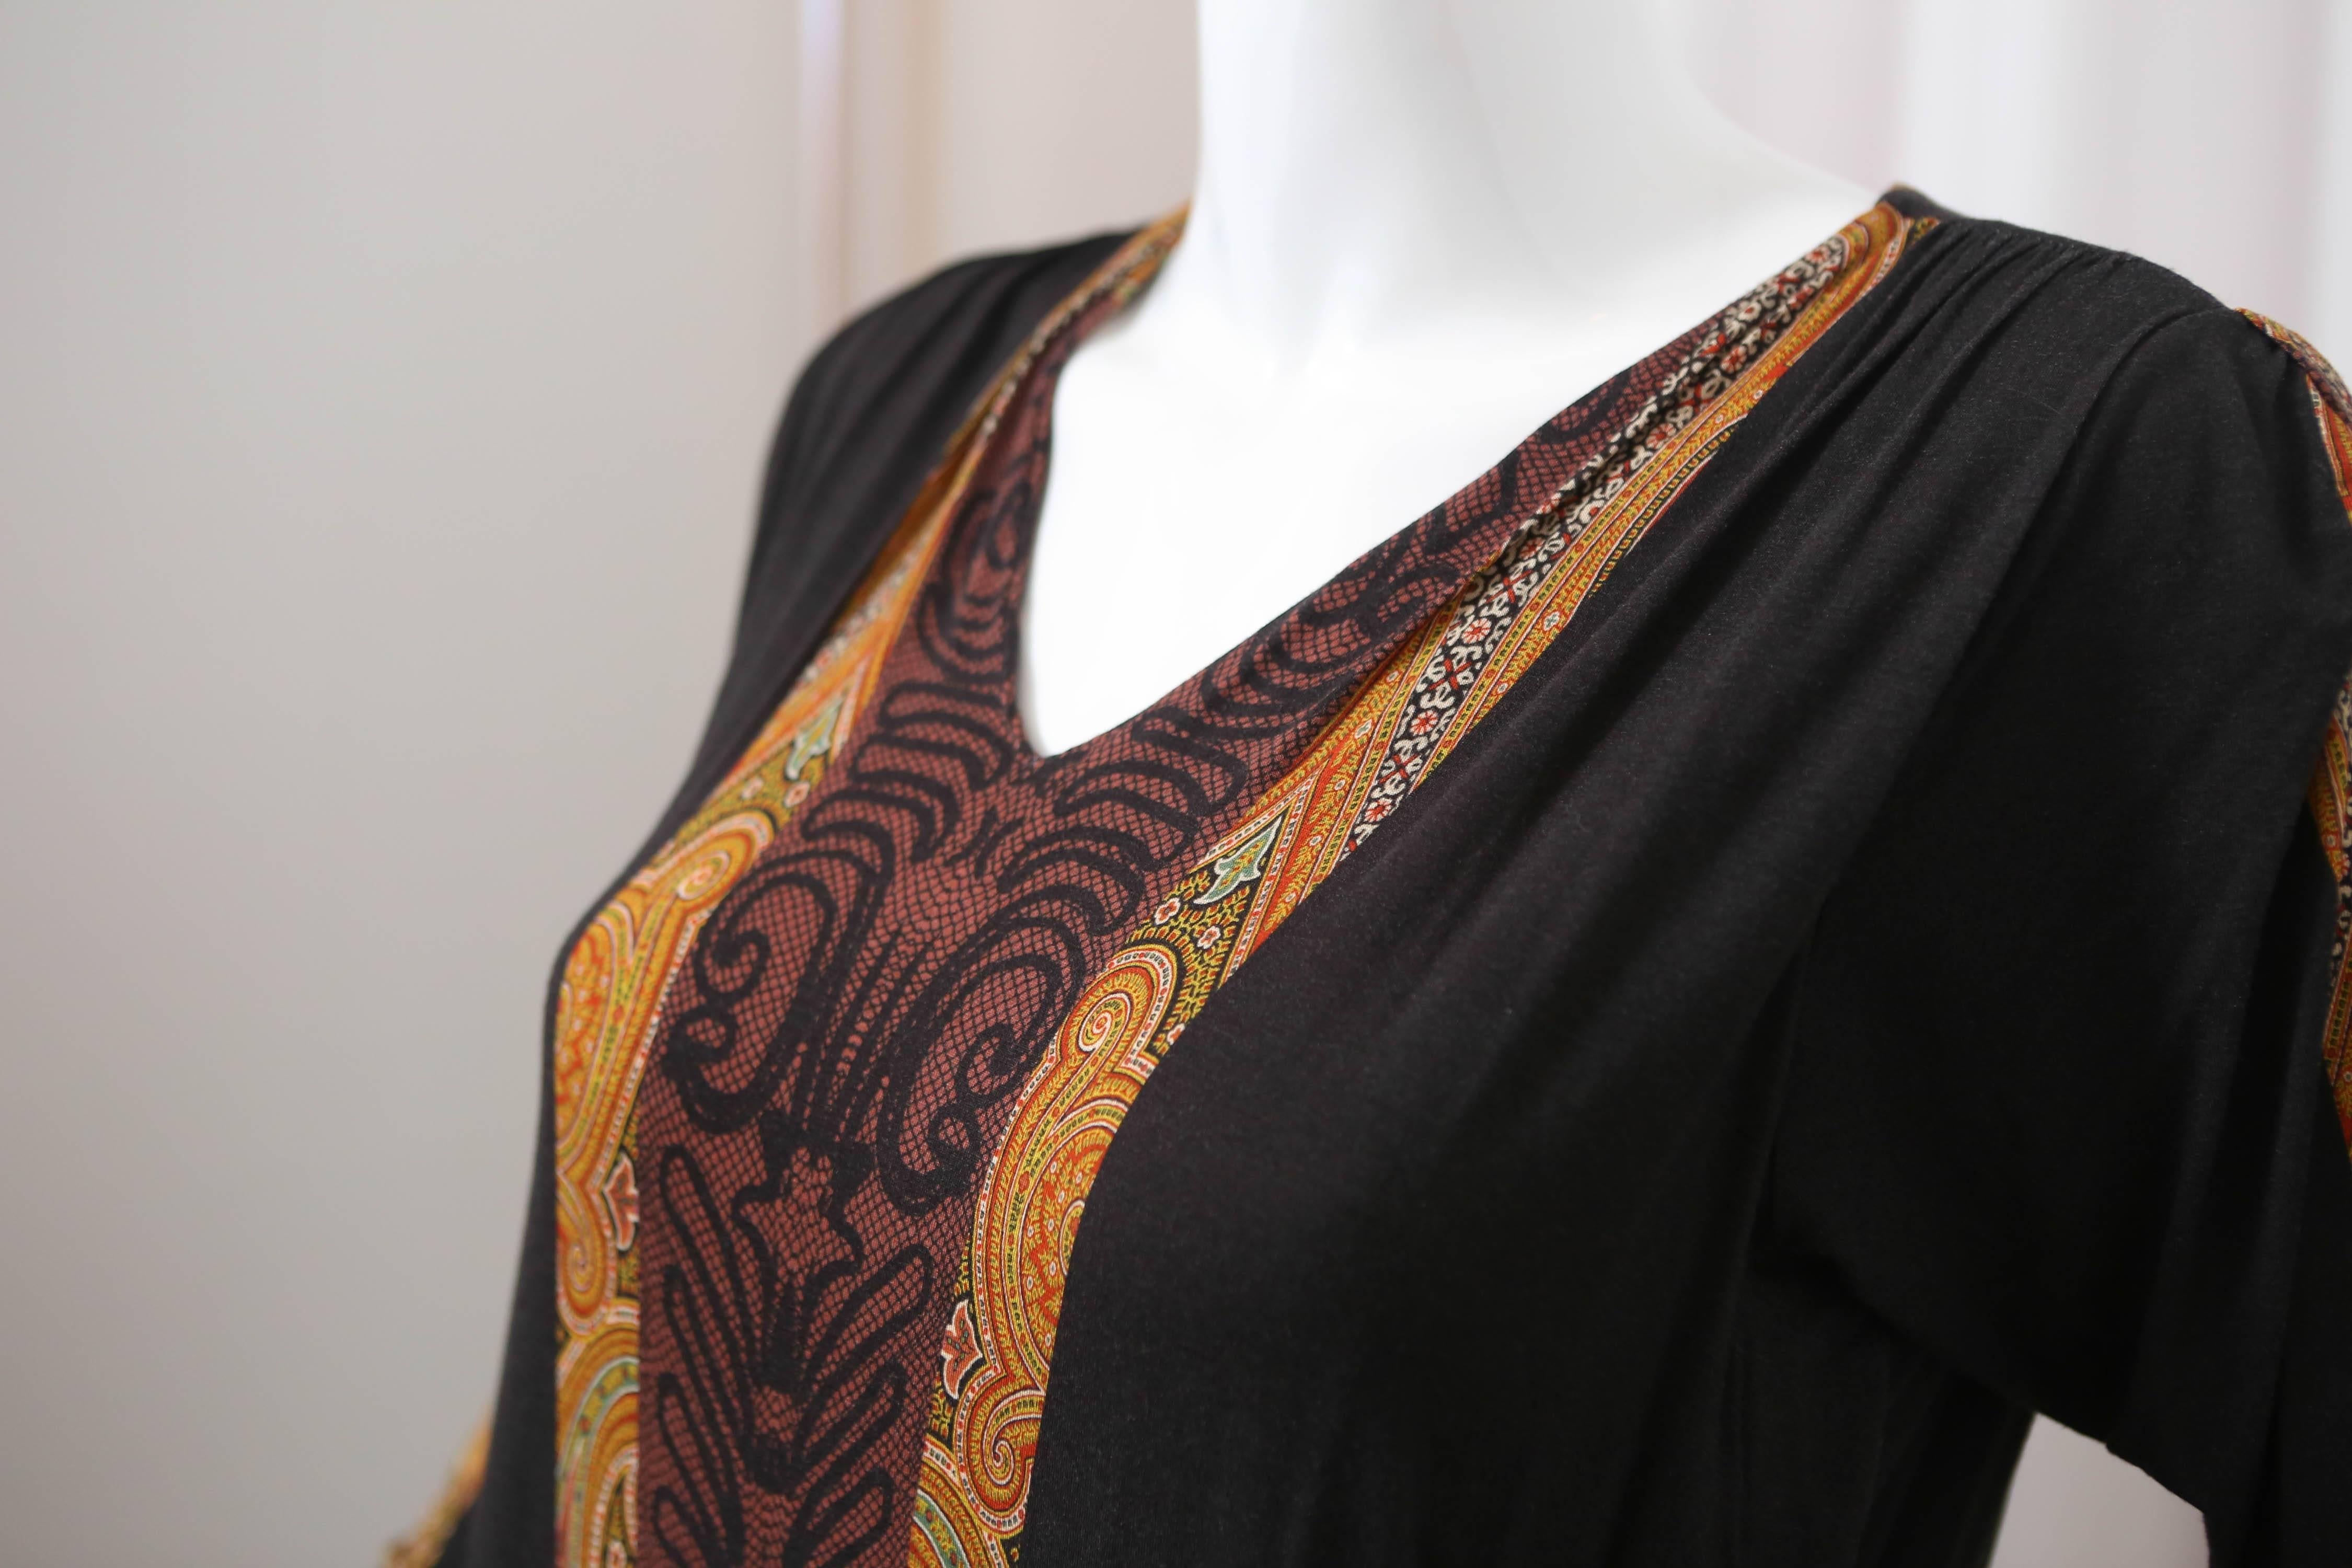 Black cashmere long sleeve paisley printed v-neck dress with shoulder rouching detail.